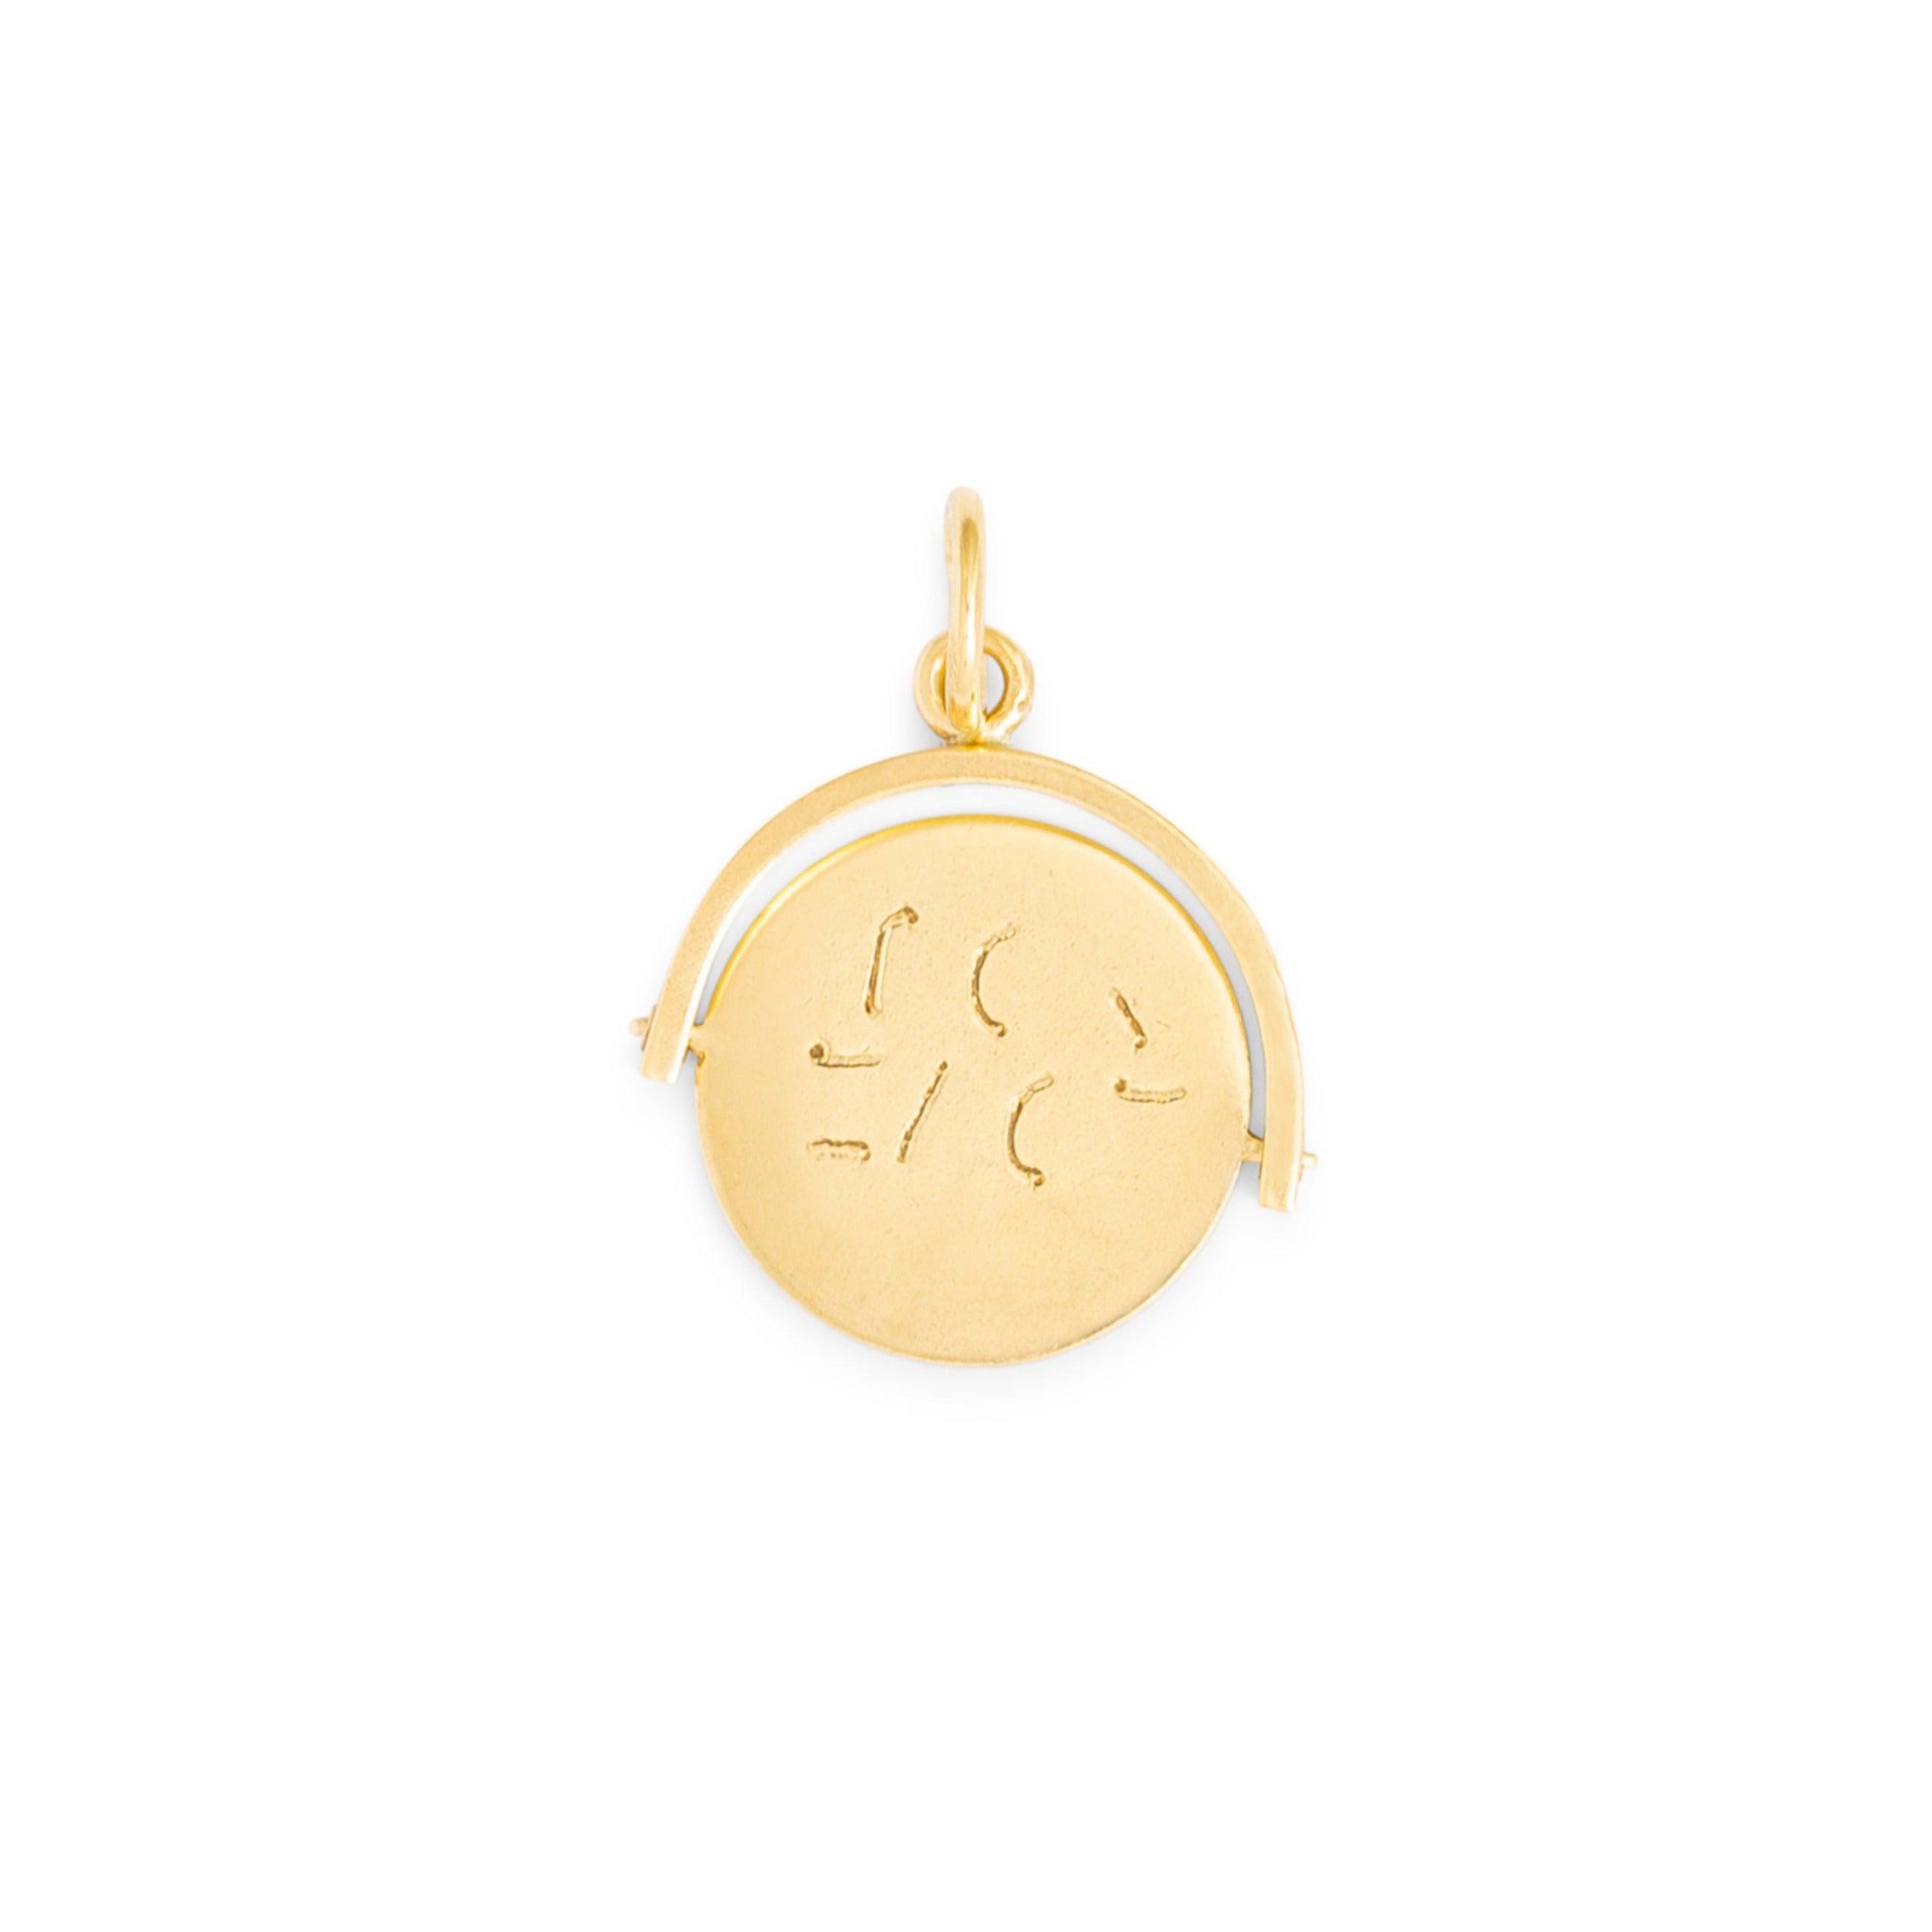 English "I LOVE YOU" Spinner 9k Gold Charm